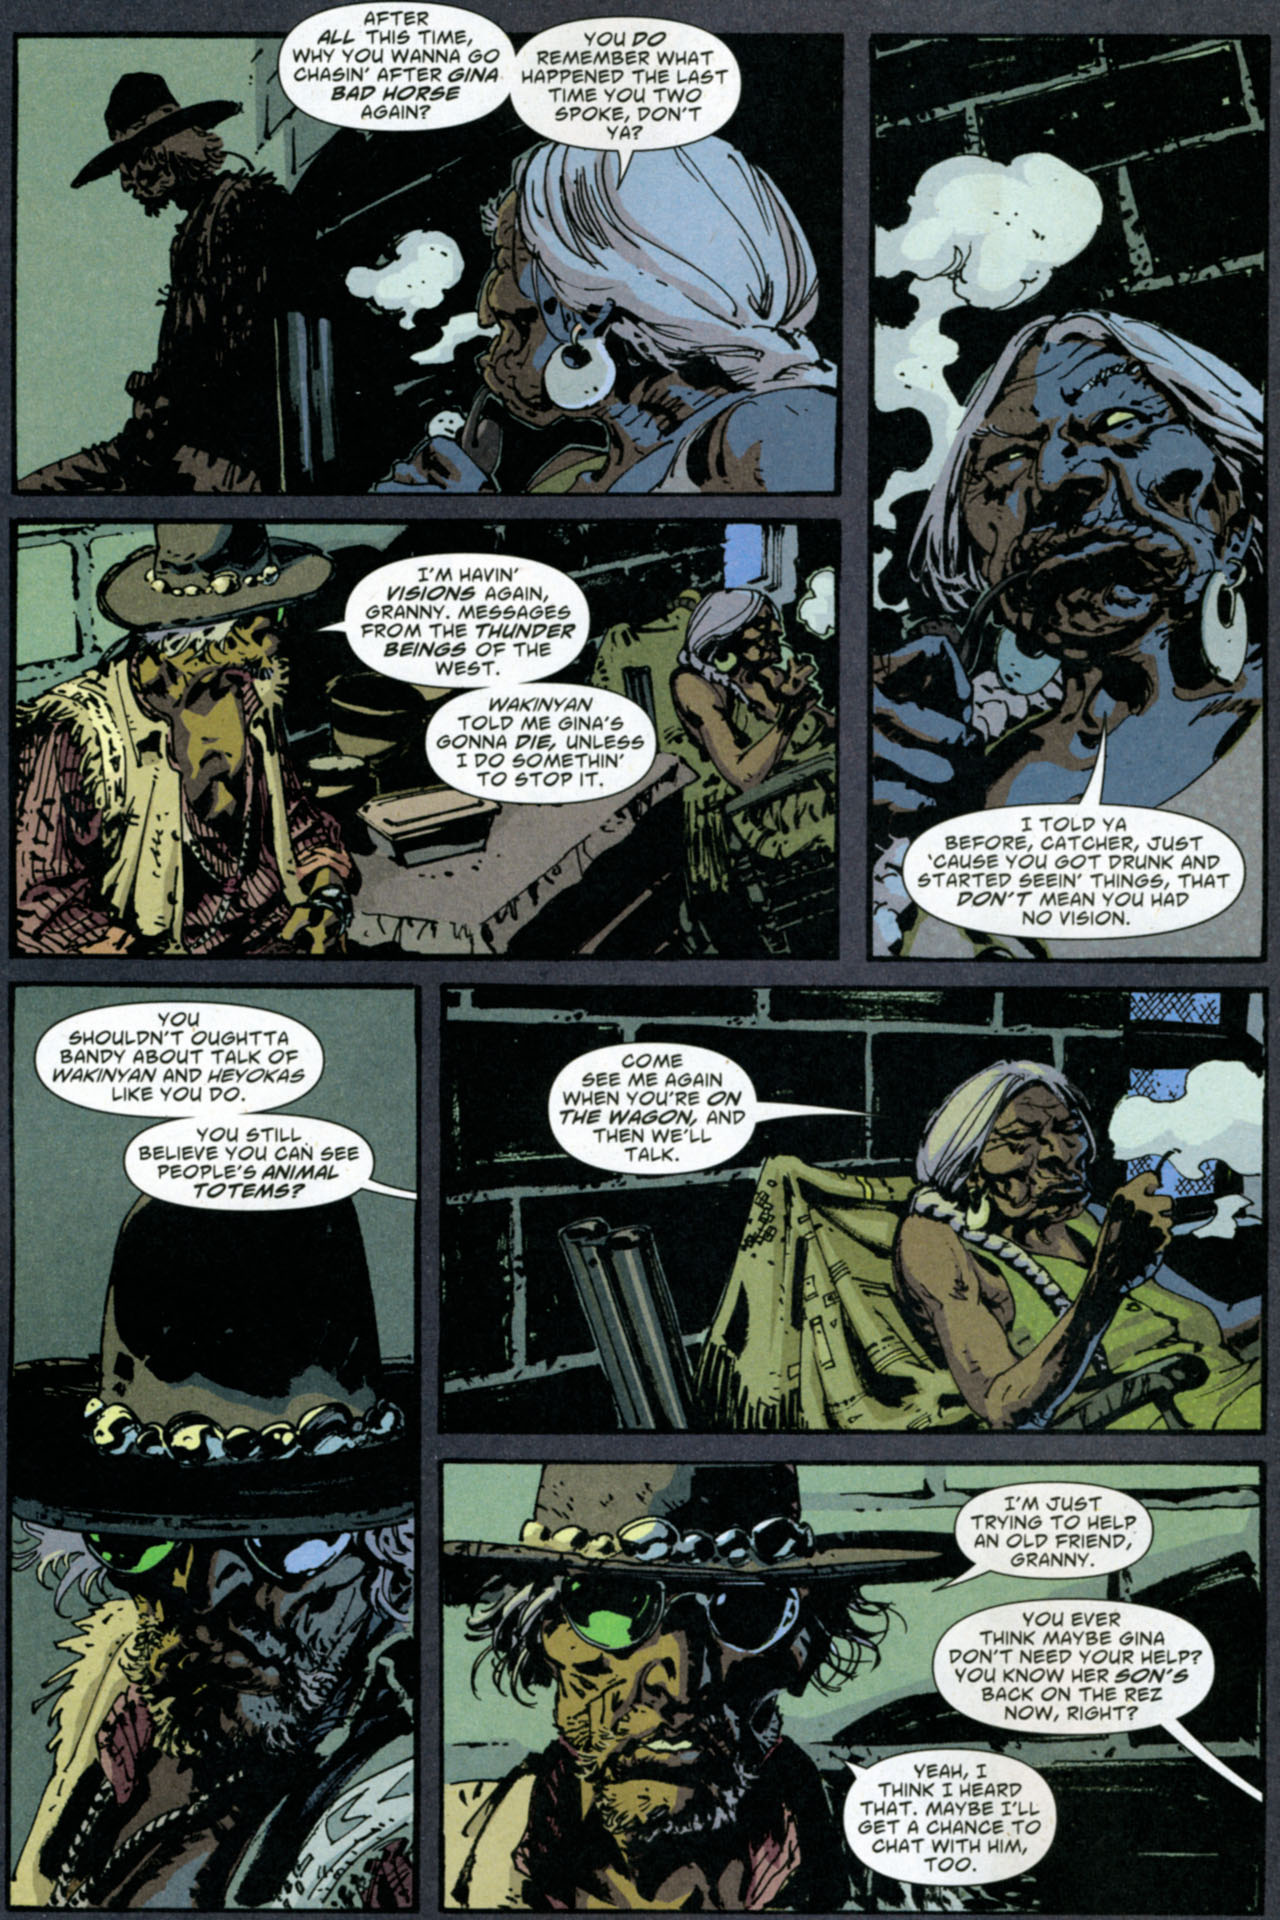 Scalped #9 - Casino Boogie, Part 4 of 6: A Thunder Being Nation I Am 